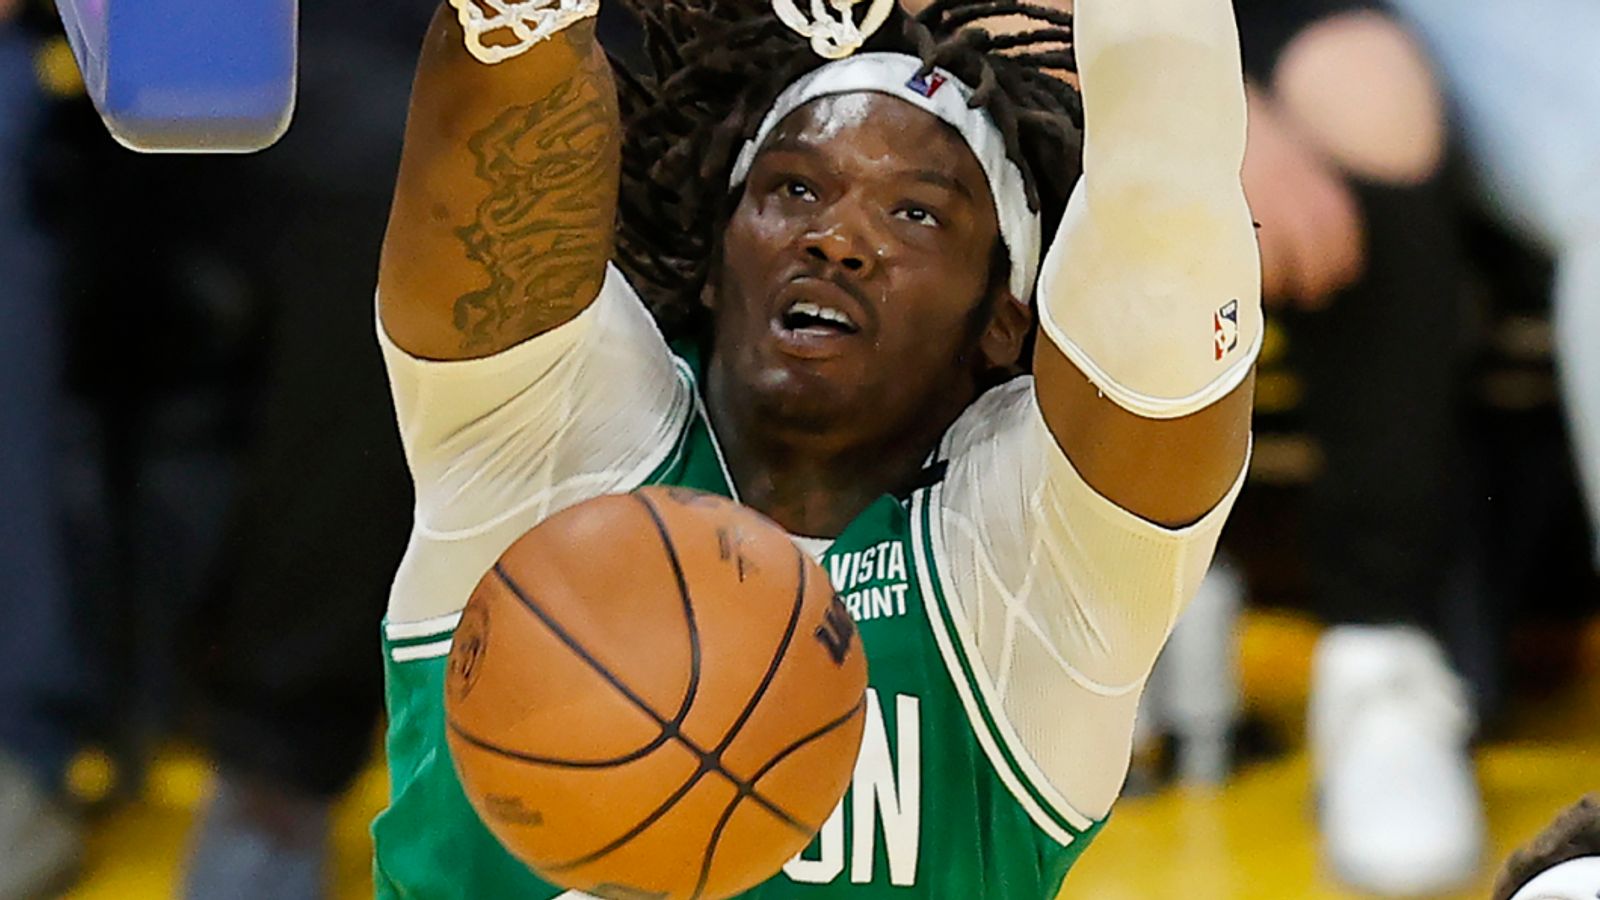 Boston Celtics center Robert Williams III explains ‘Time Lord’ nickname double-meaning